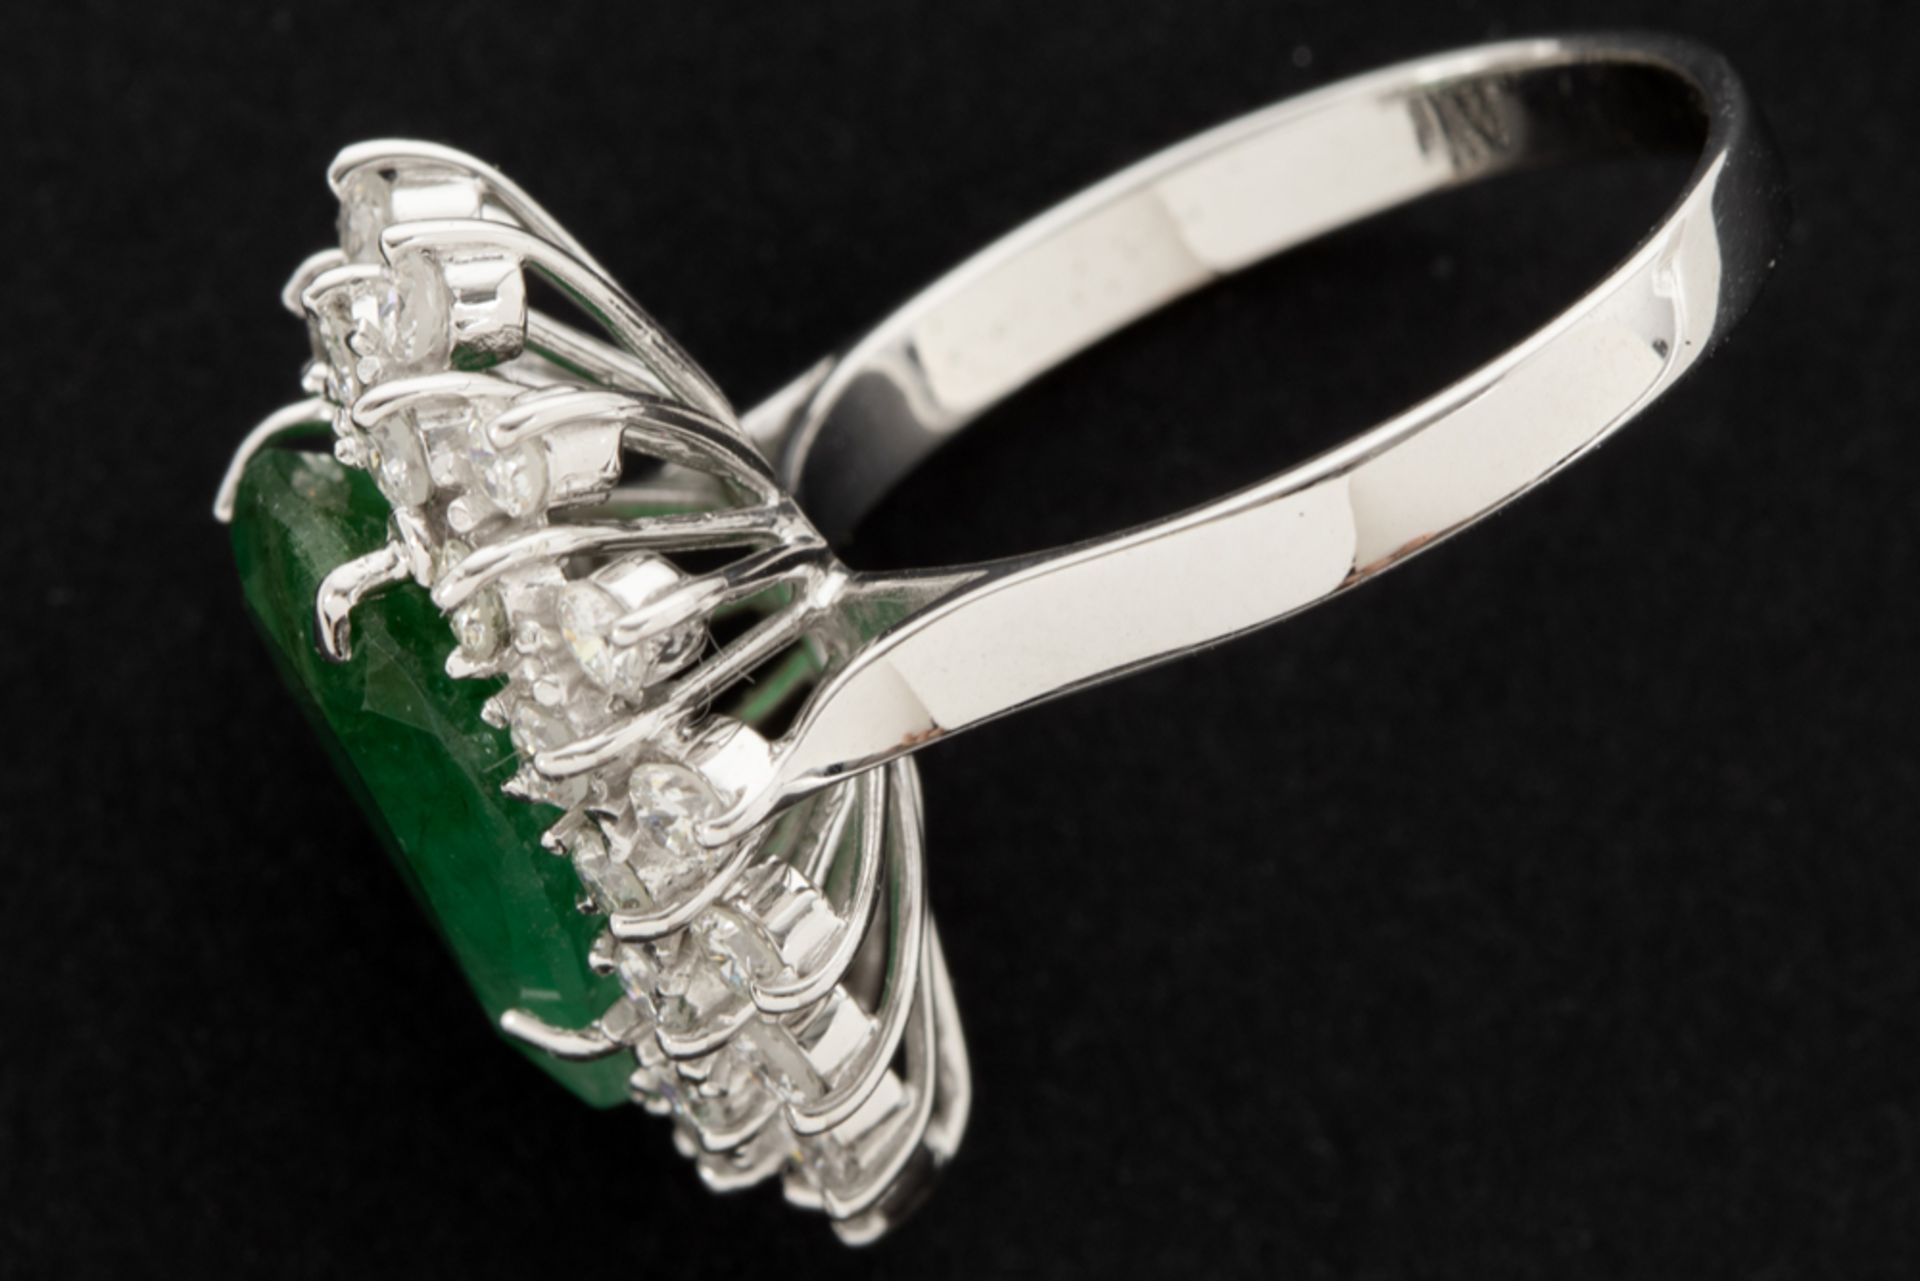 ring with a classic design in white gold (18 carat) with a 4 carat emerald surrounded by circa 1, - Bild 2 aus 2